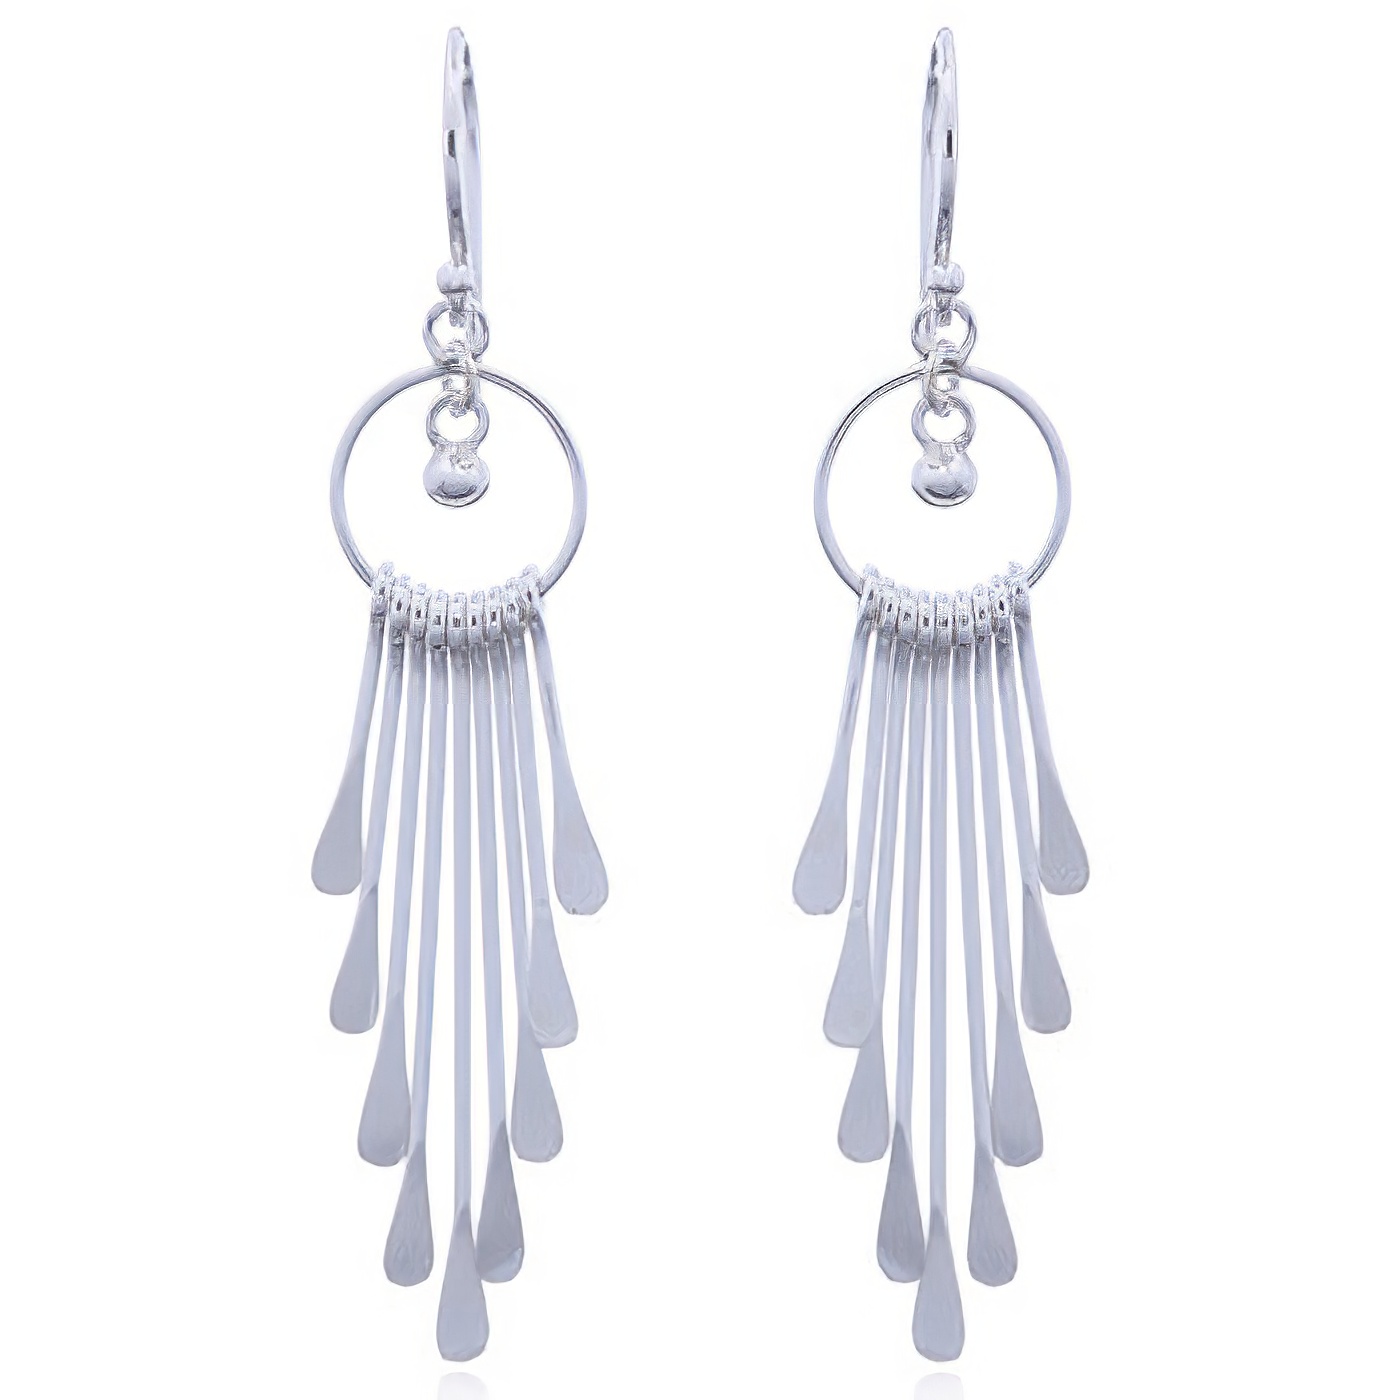 Long Sterling Silver Chandelier Earrings Contemporary Design by BeYindi 